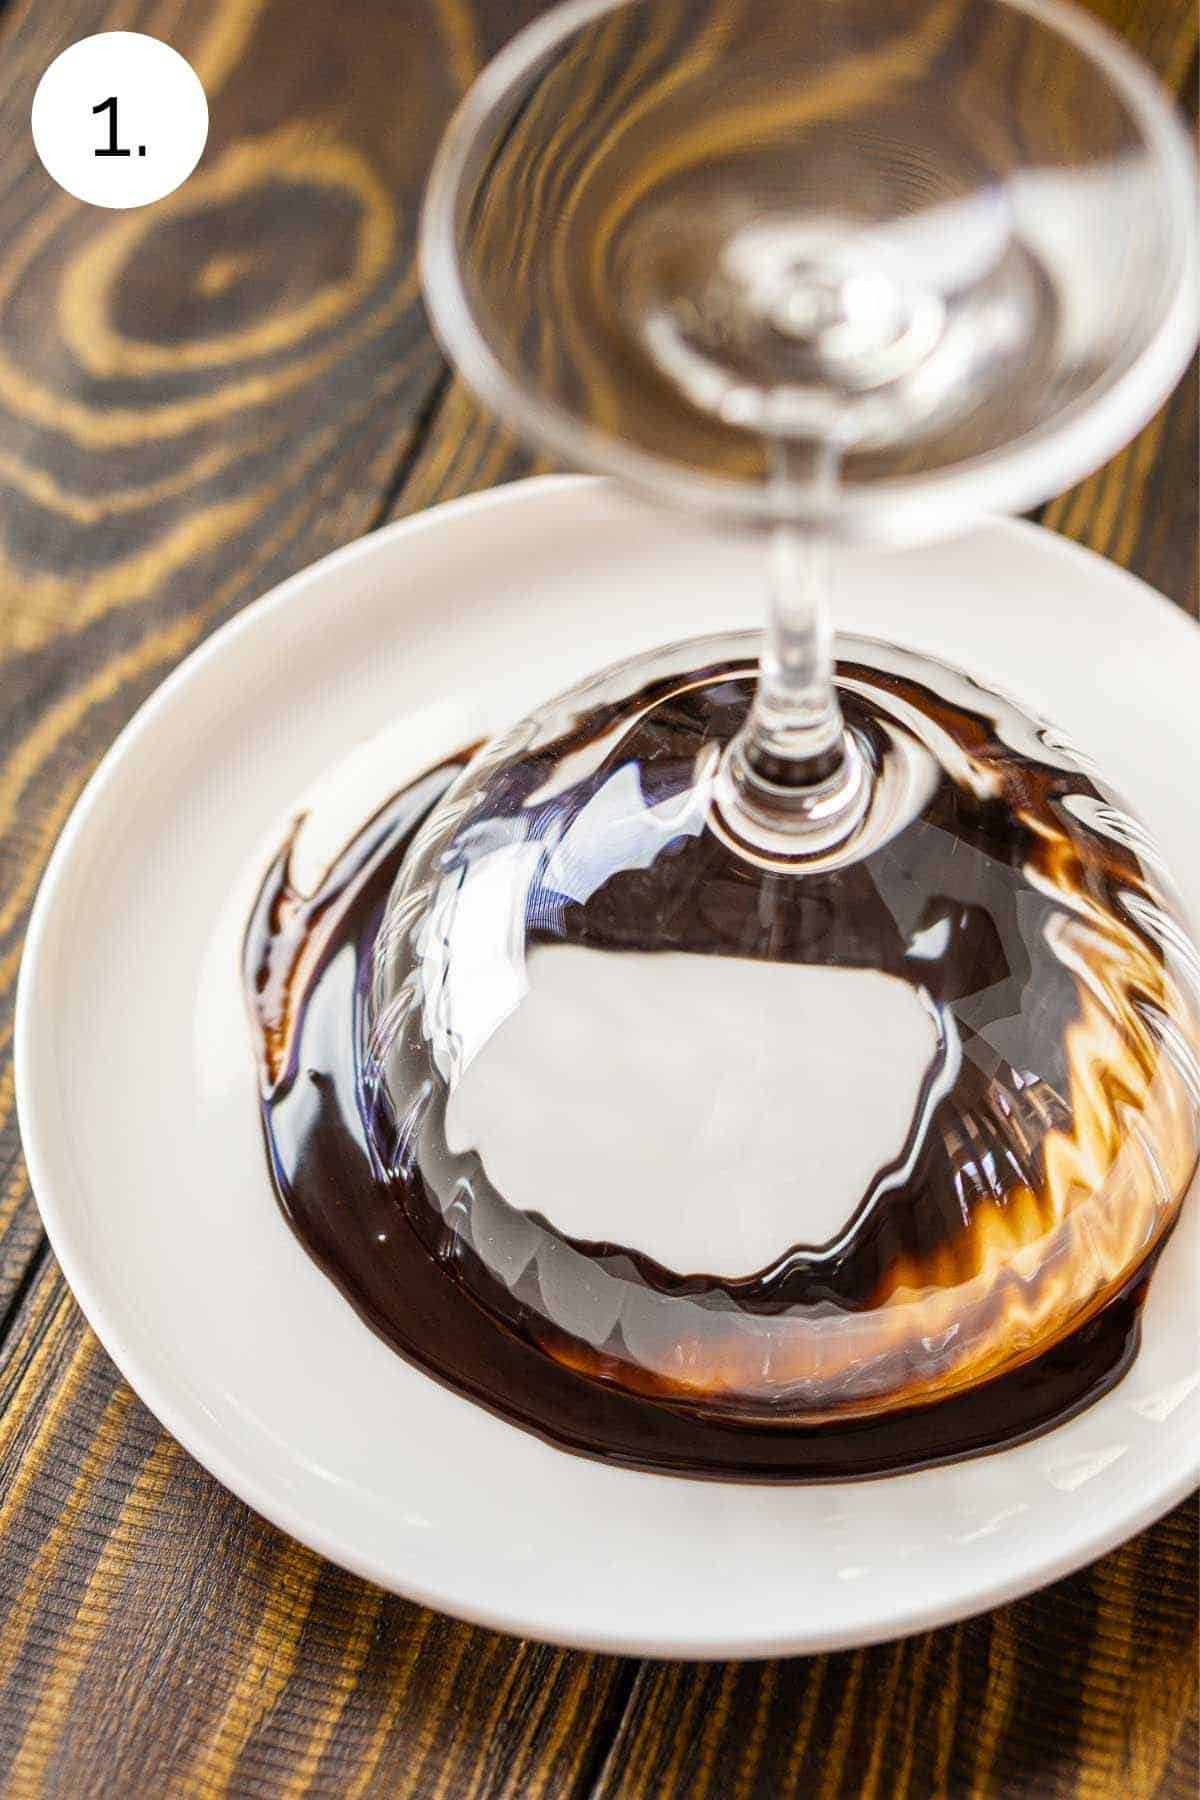 Swirling the cocktail glass in chocolate syrup on a plate.